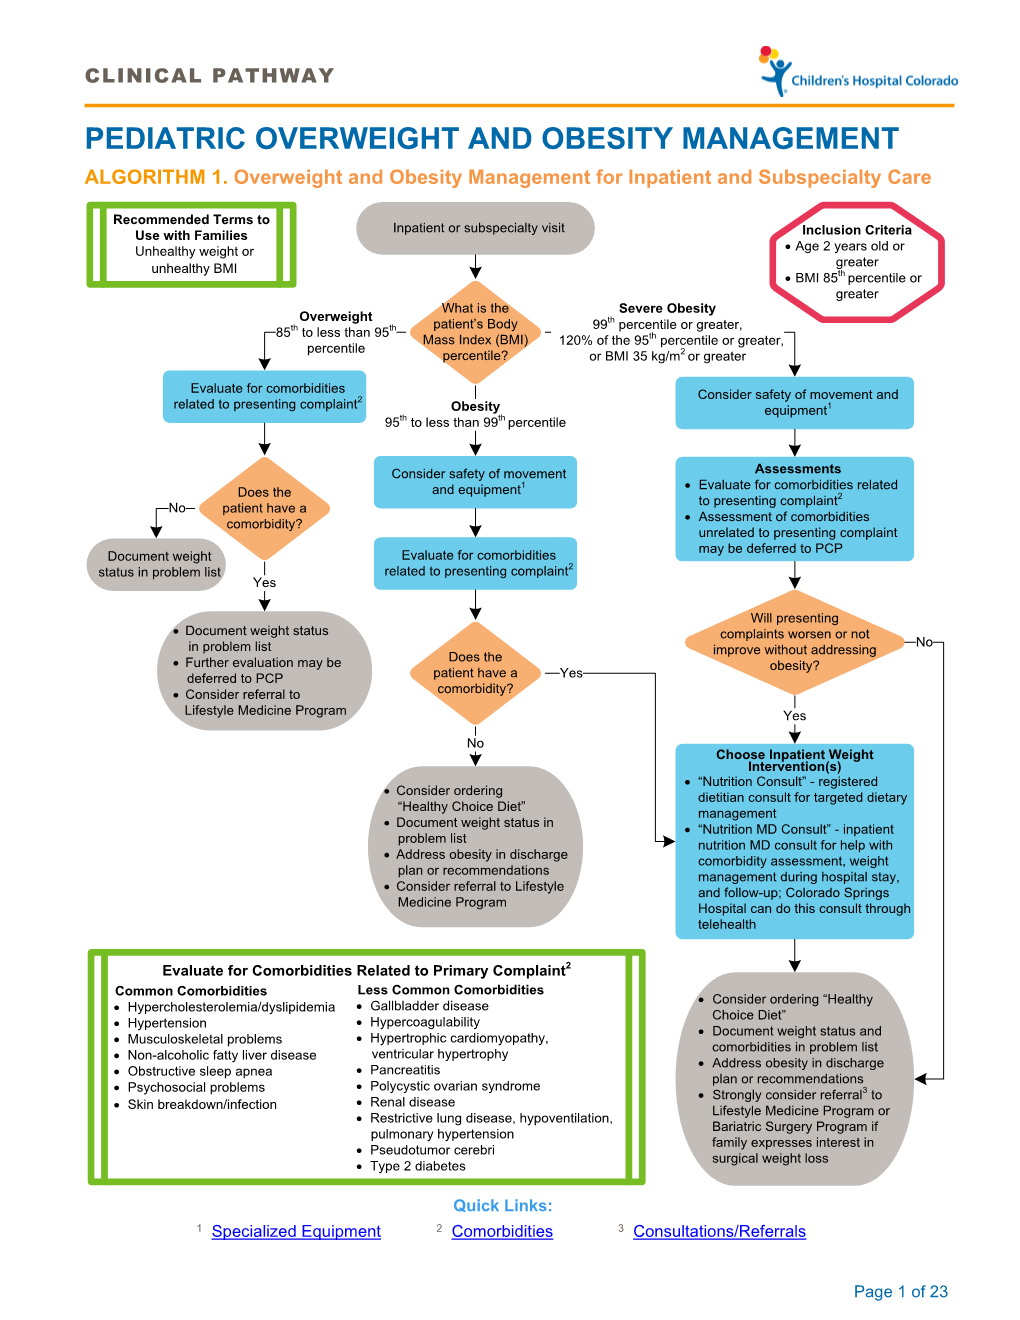 Pediatric Overweight and Obesity Management Algorithm 1